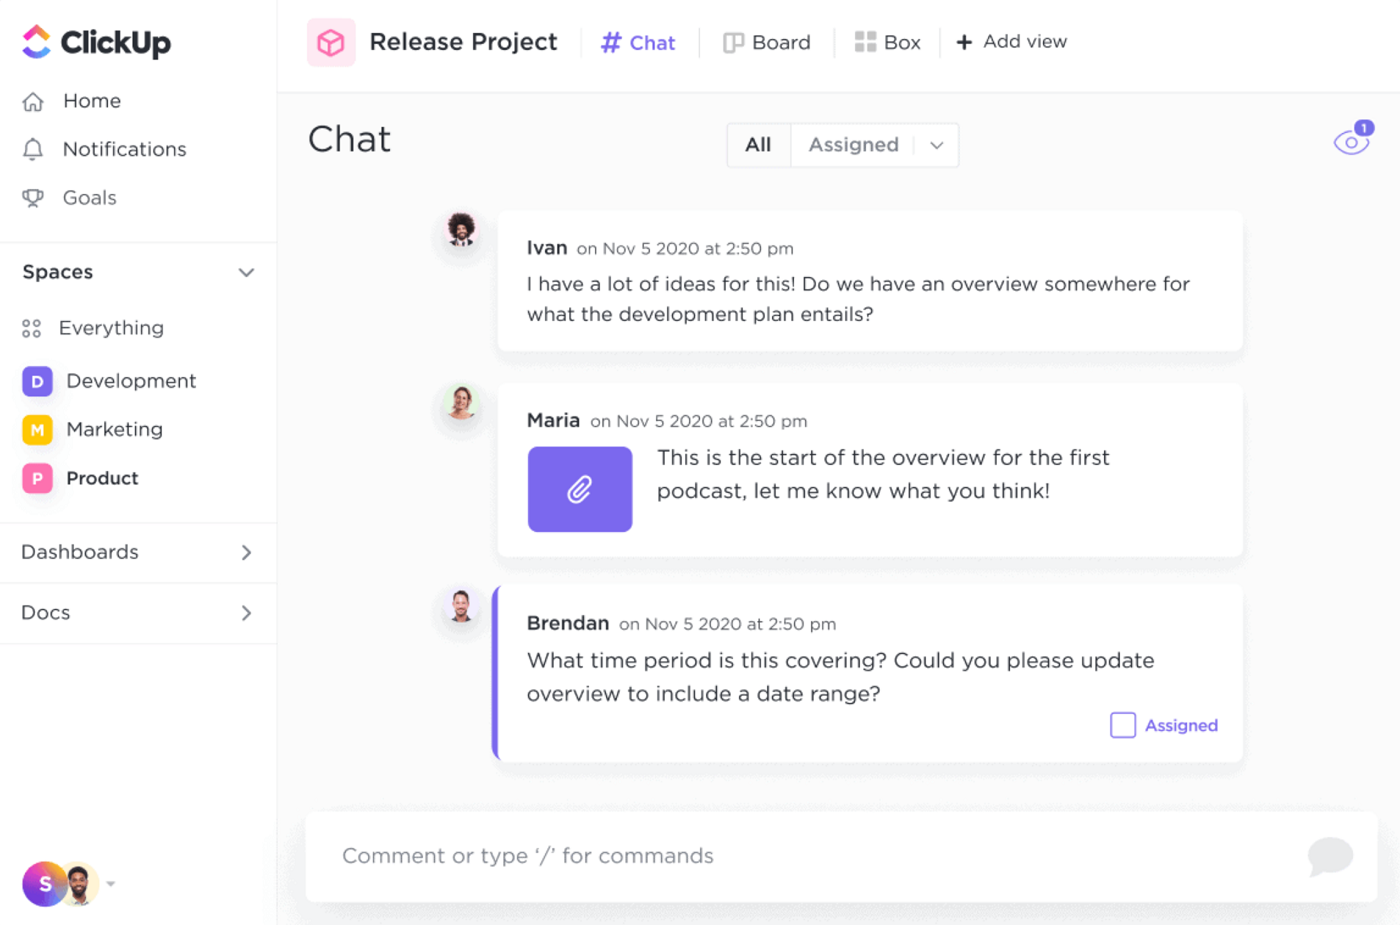 Users can chat directly in the ClickUp app without having to switch to another platform.